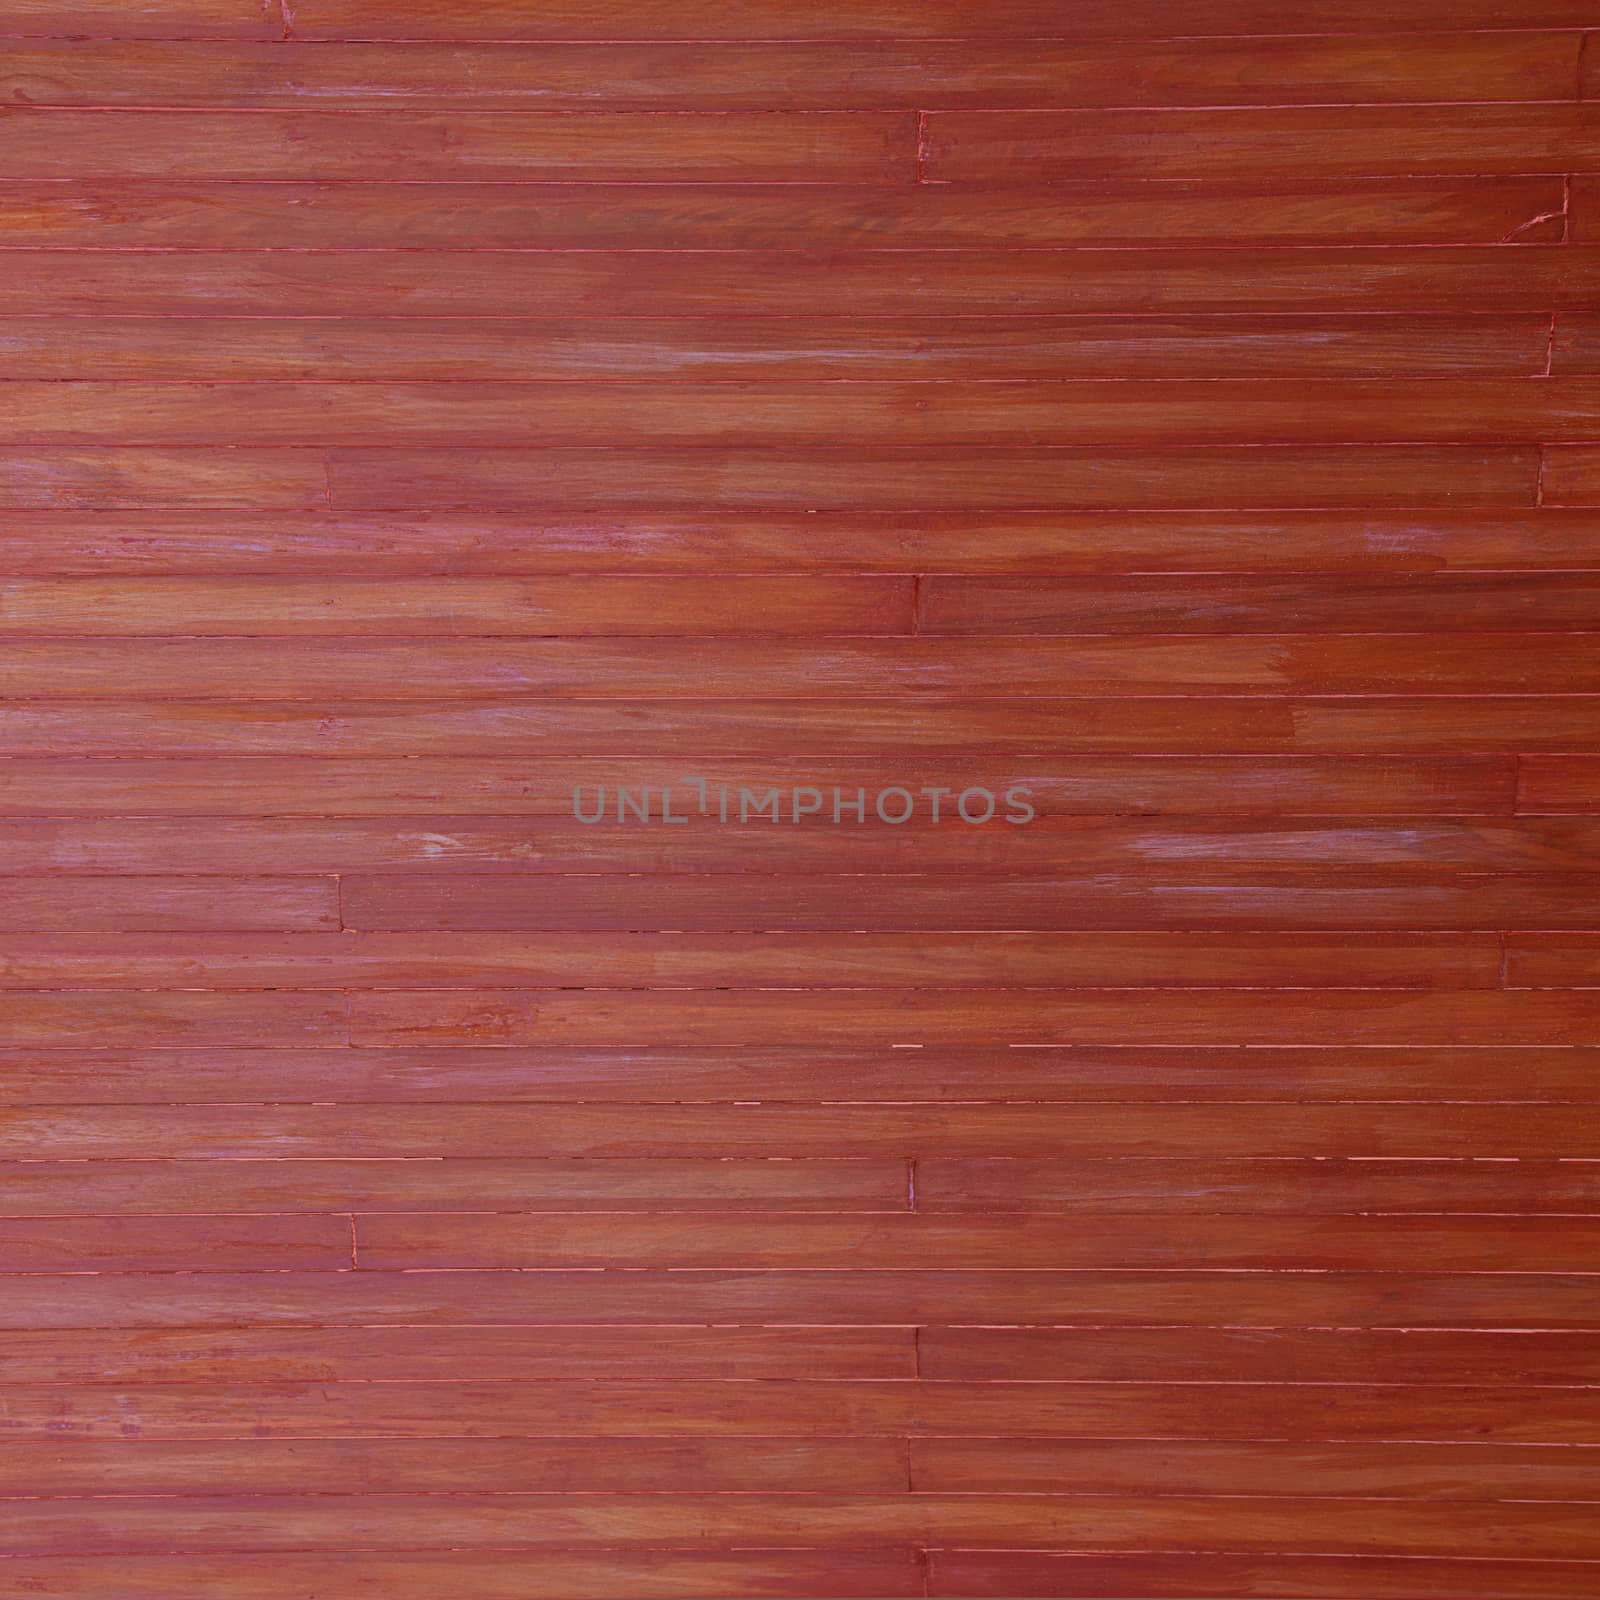 Wood panels for background by wyoosumran